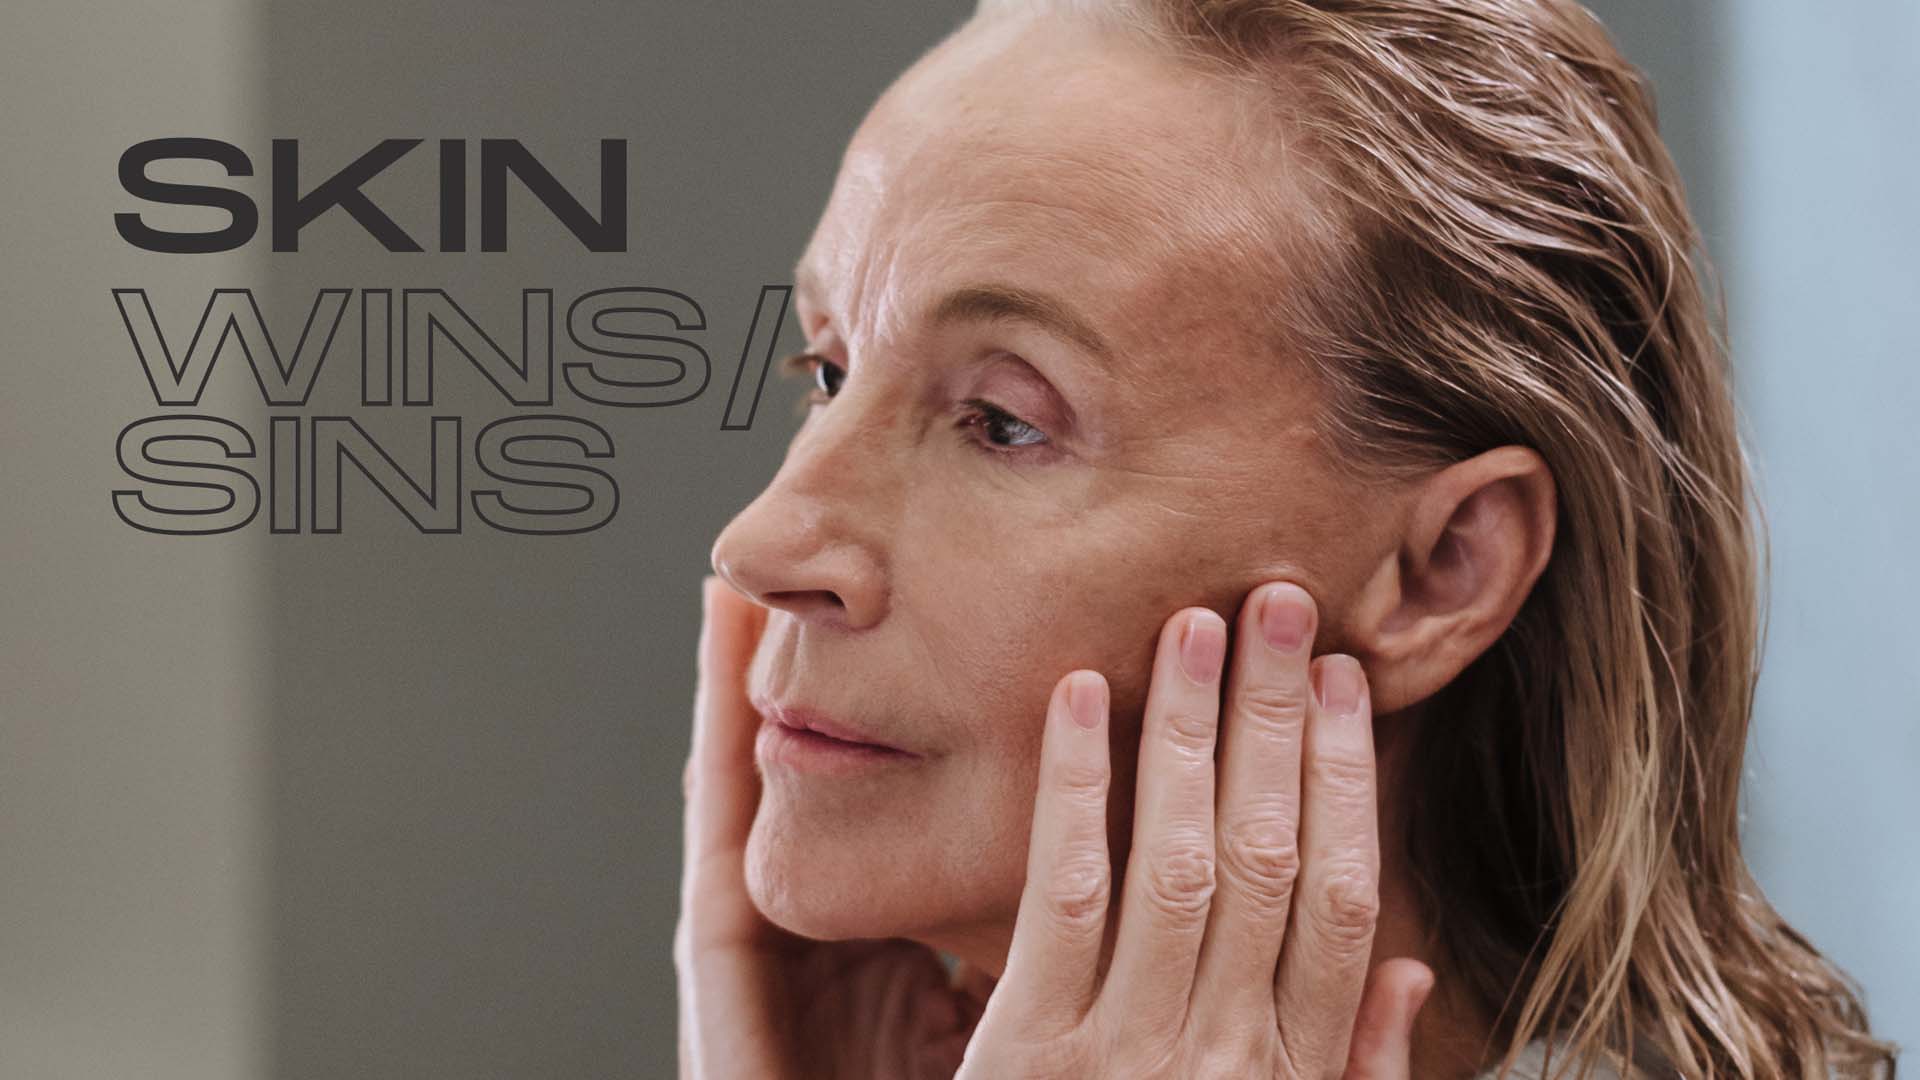 Skin Wins and Skin Sins: Professional Microneedling vs. At-Home Microneedling Devices